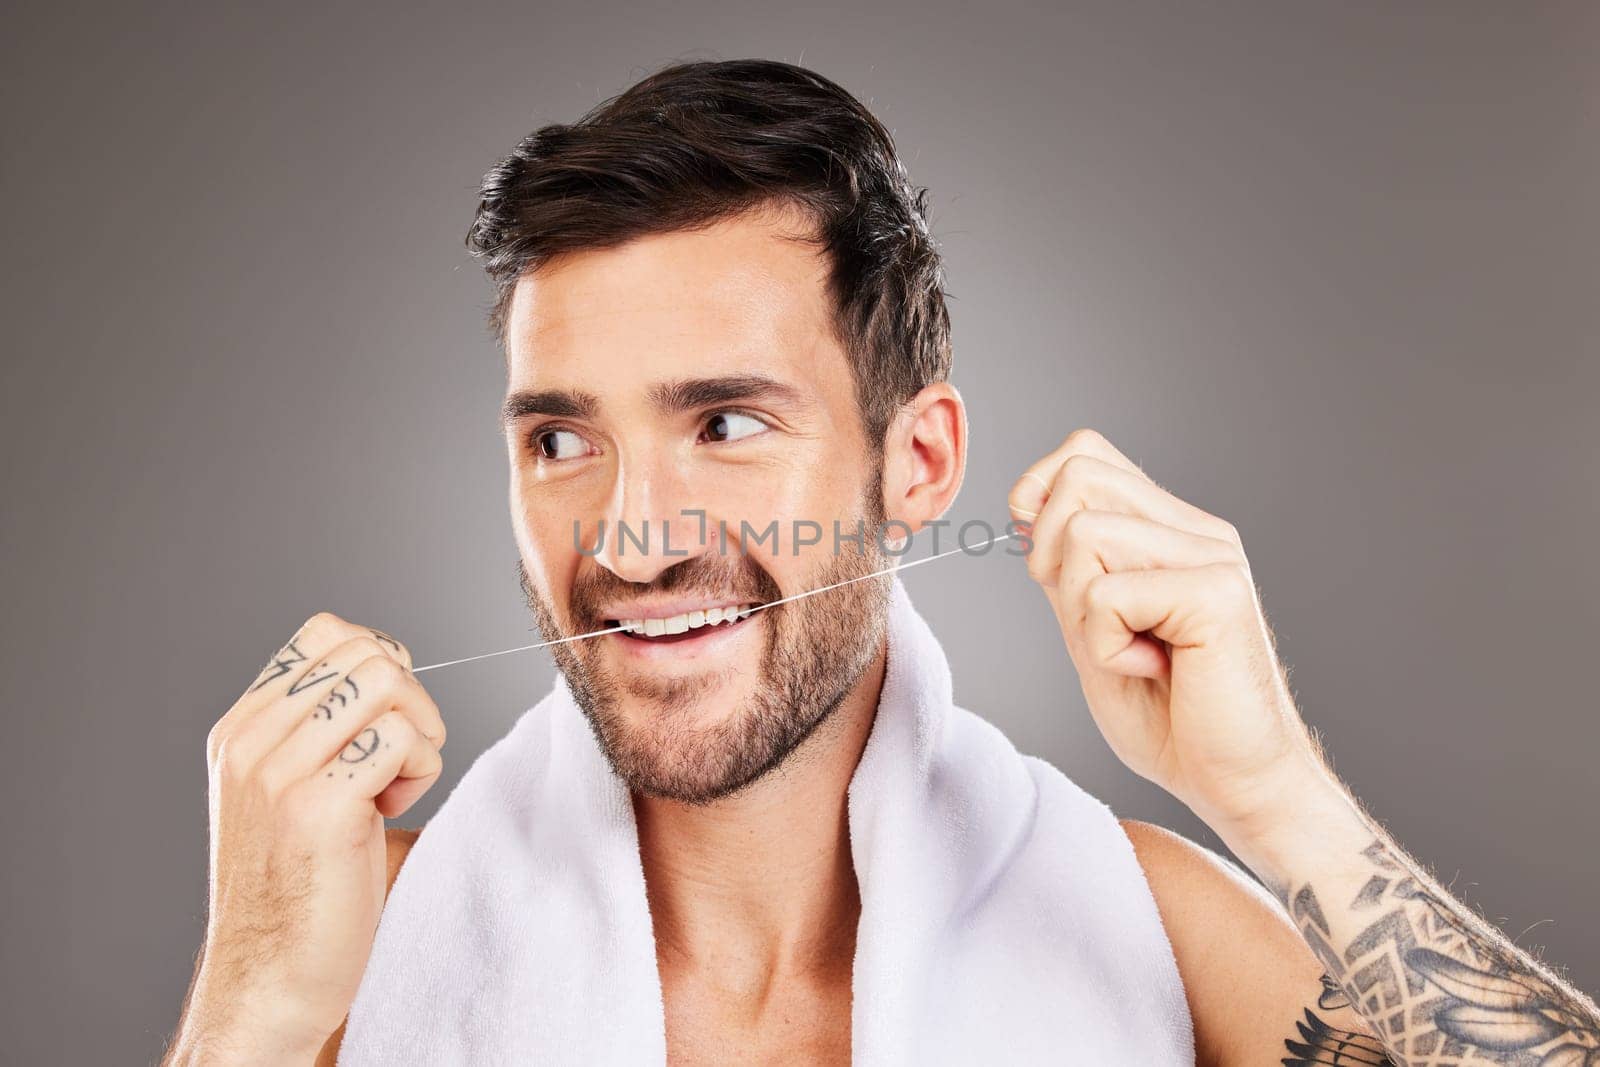 Teeth, dental floss and cleaning man in studio isolated on gray background. Oral care, dental health and happy male model from Australia tooth flossing for gum care, wellness or healthy mouth hygiene.